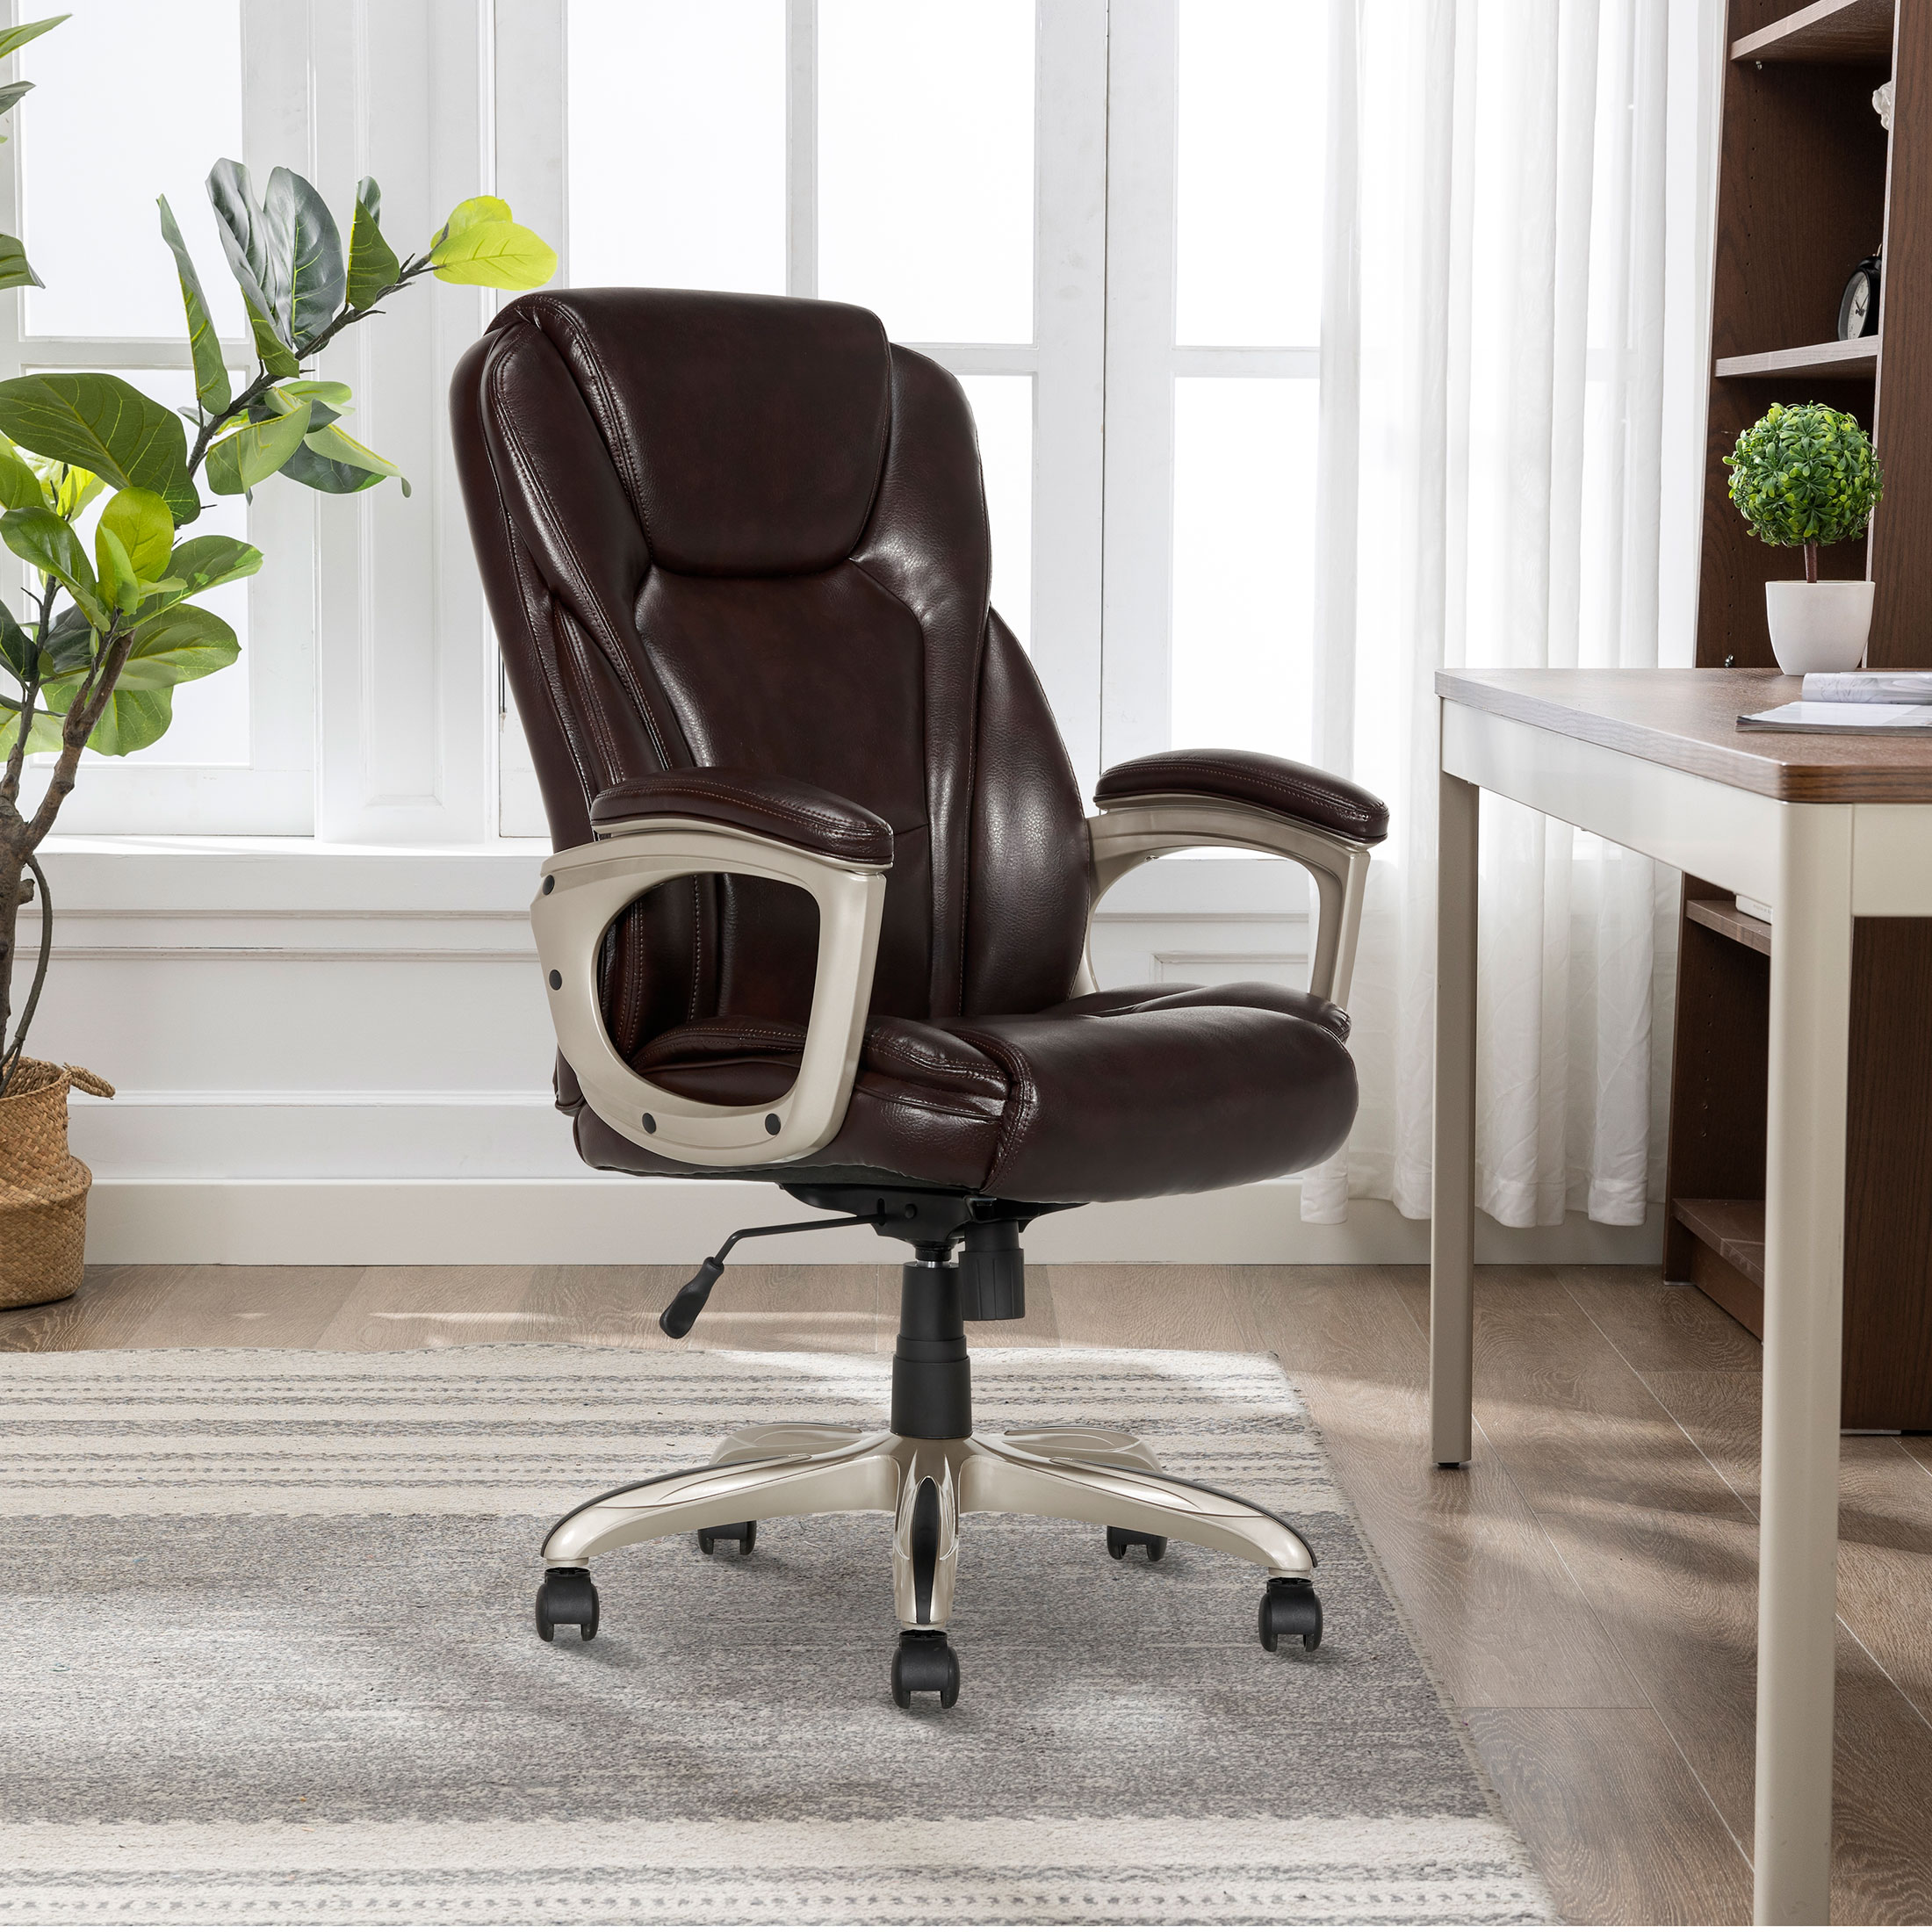 Serta Heavy-Duty Bonded Leather Commercial Office Chair with Memory Foam, 350 lb capacity, Brown - image 2 of 8